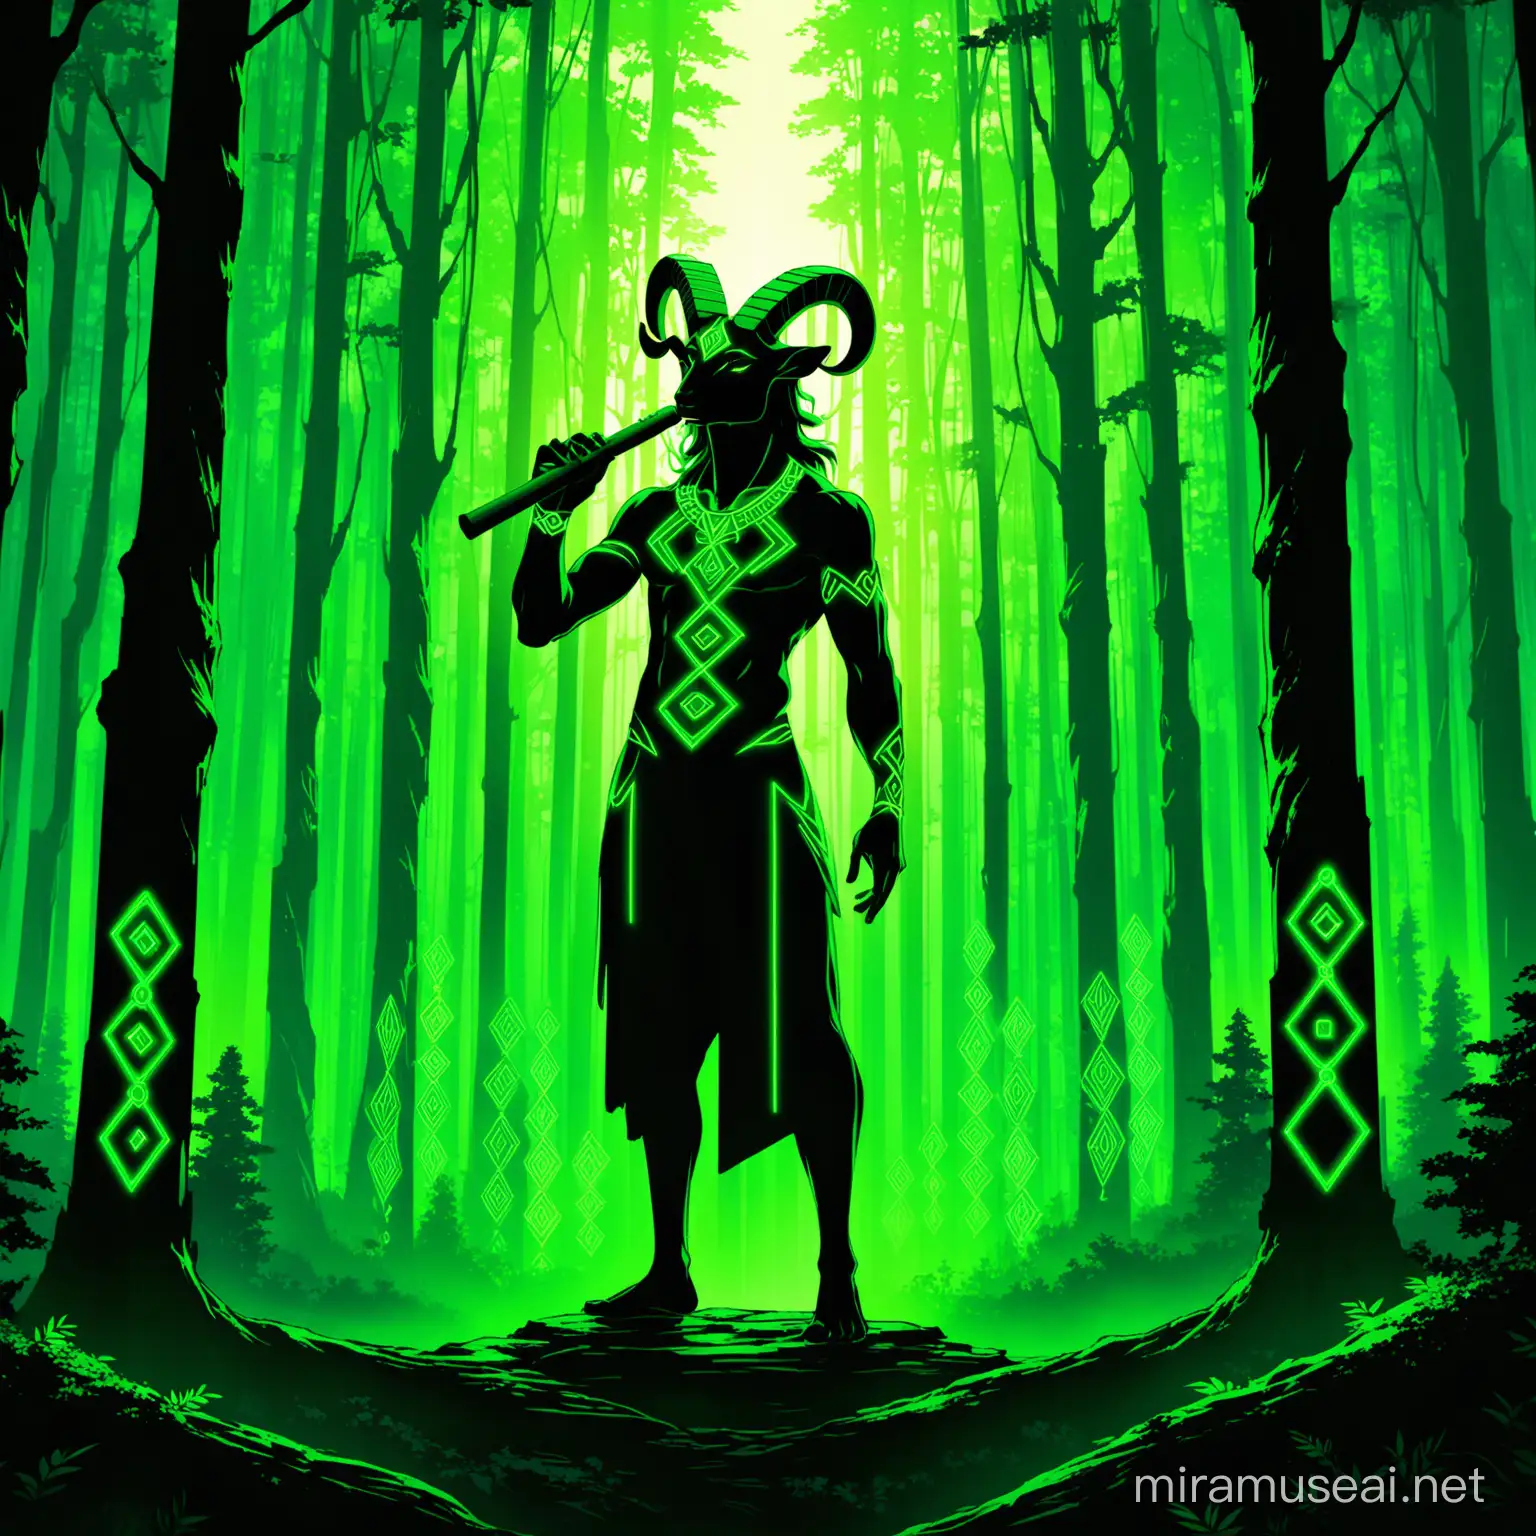 Neon Green Pan Silhouette with Dryads in a Mystical Forest